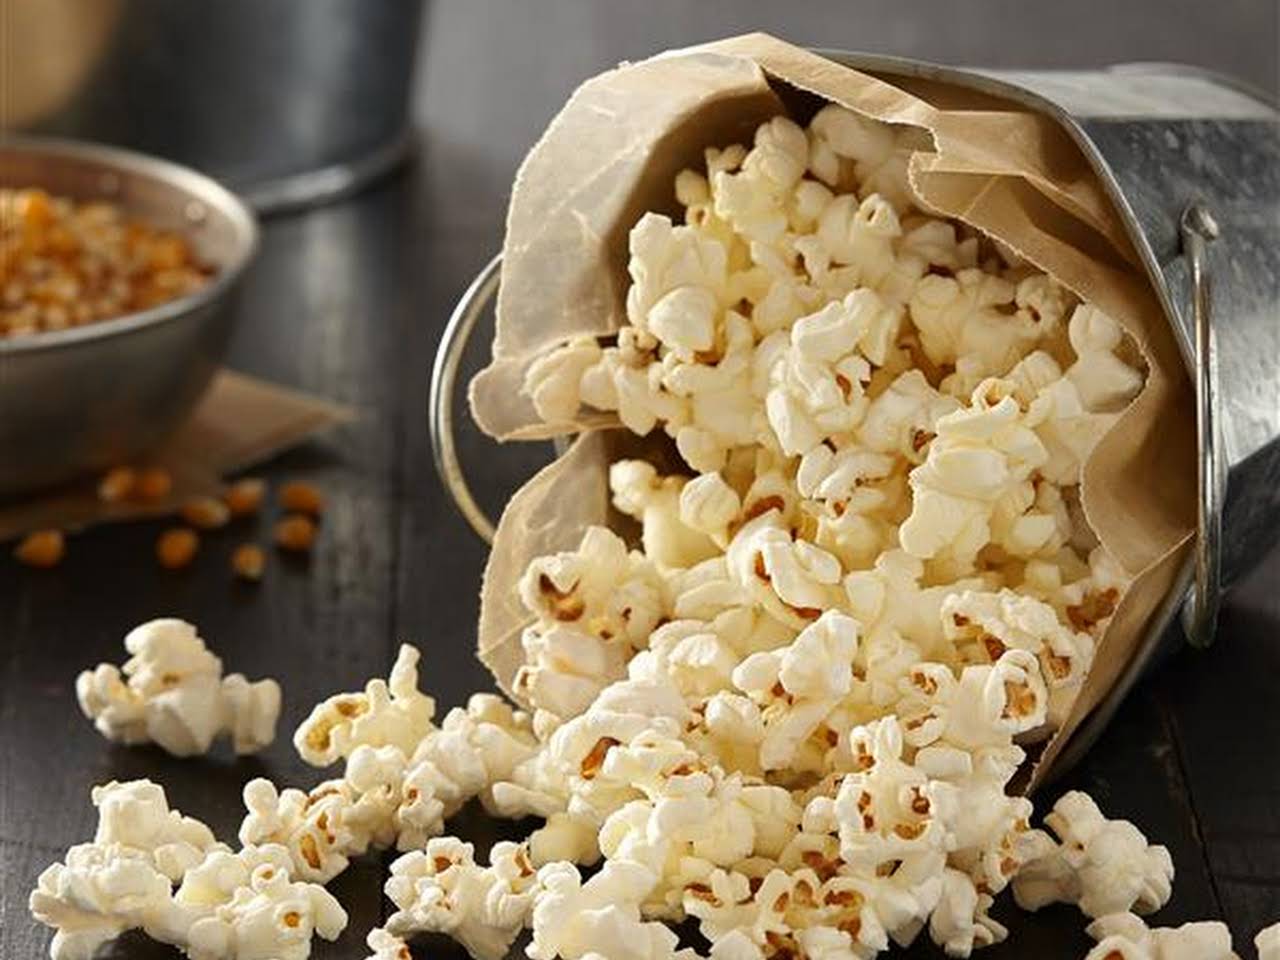 Popcorn as a Wonder Snack – Make a Healthy Choice Now